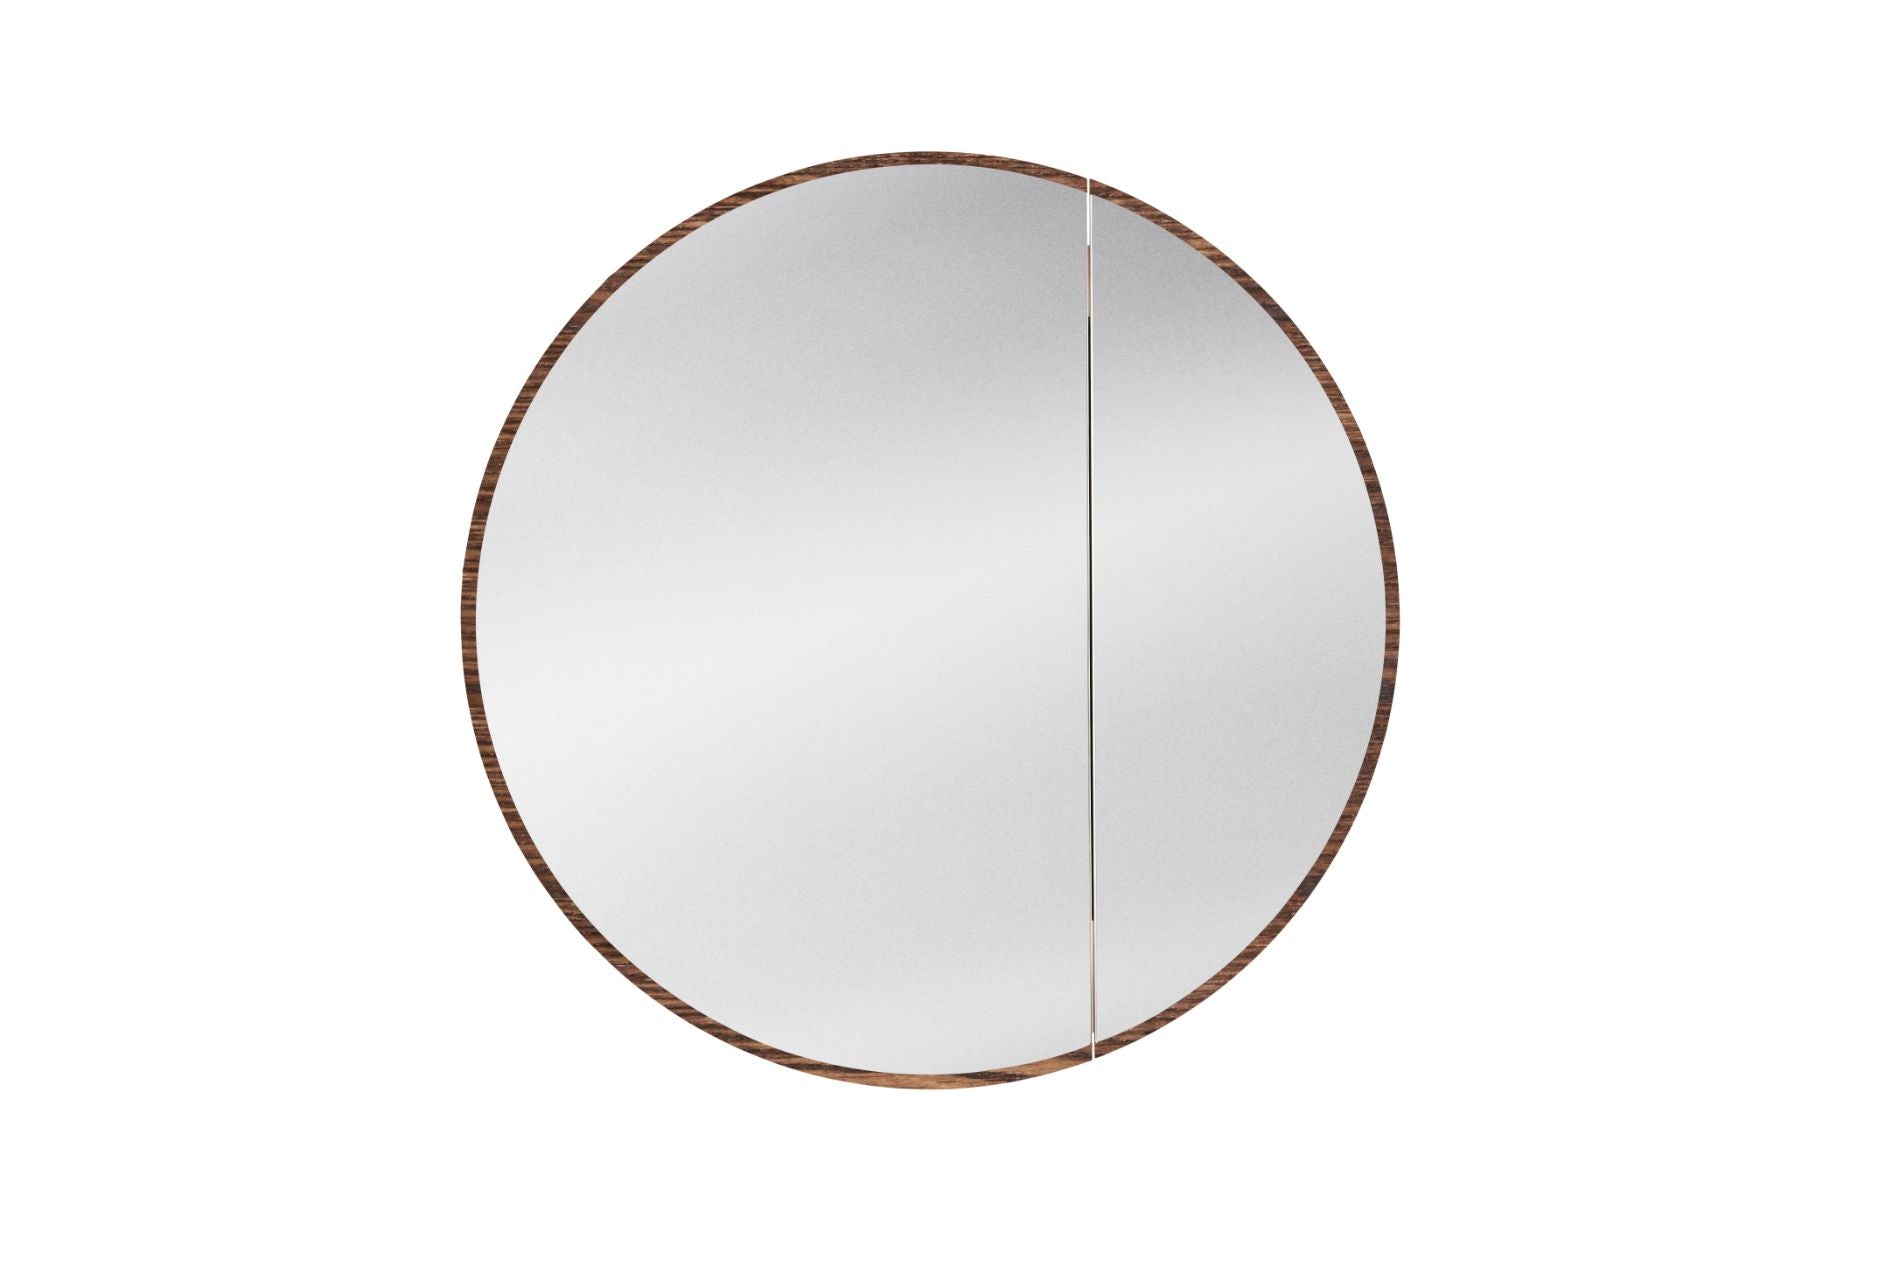 ISSY Halo Mirror with Shaving Cabinet - Zuster Furniture